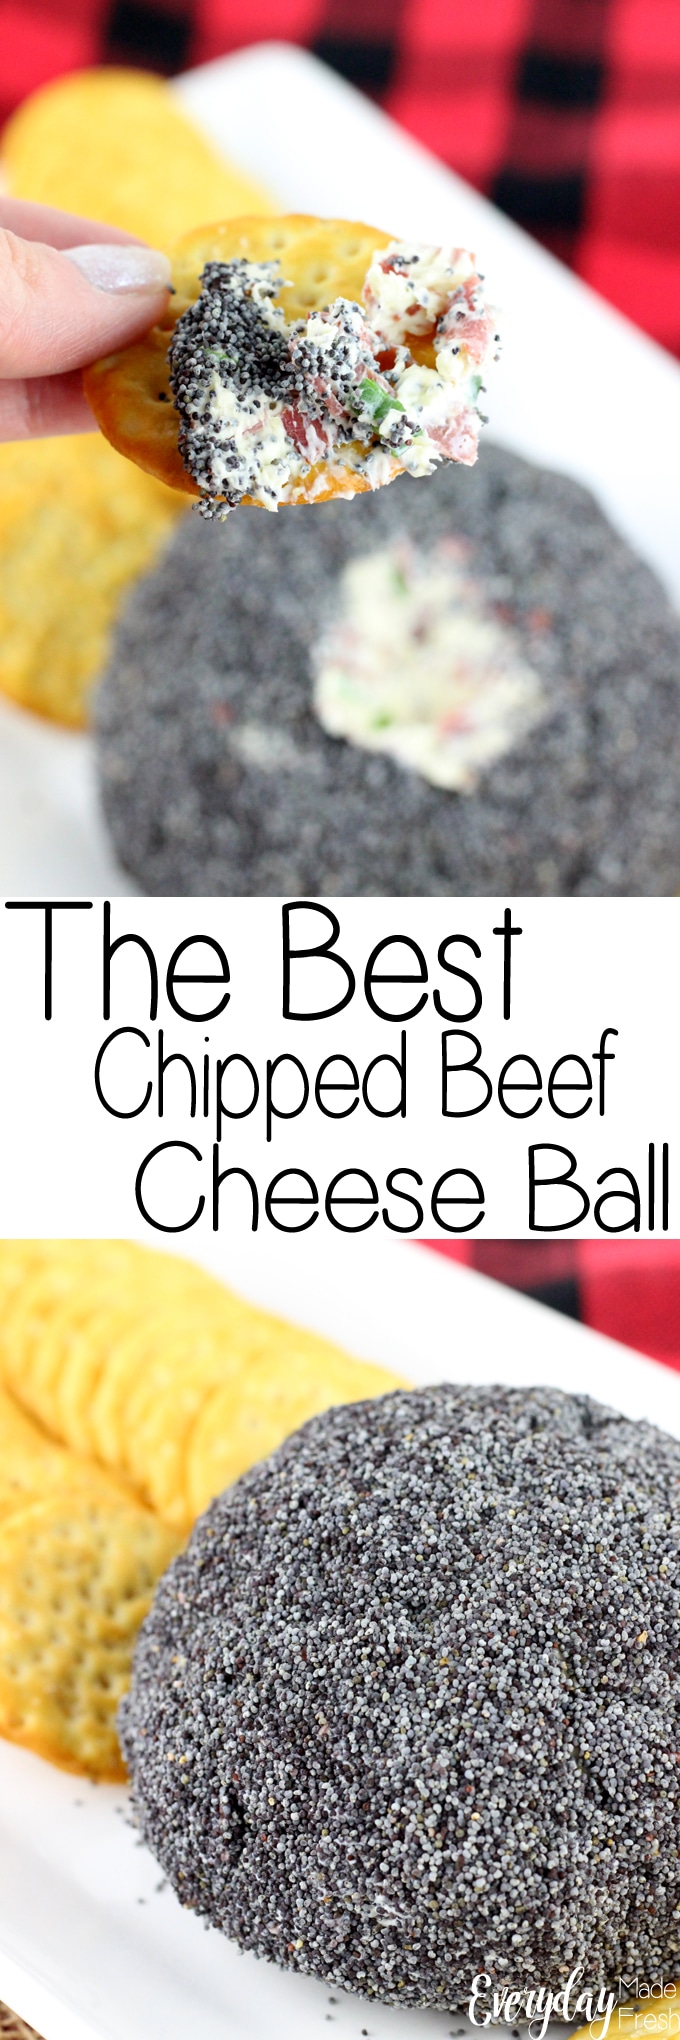 You'll want to double this recipe for sure, because this appetizer won't last long. The Best Chipped Beef Cheese Ball is loved by all! | EverydayMadeFresh.com